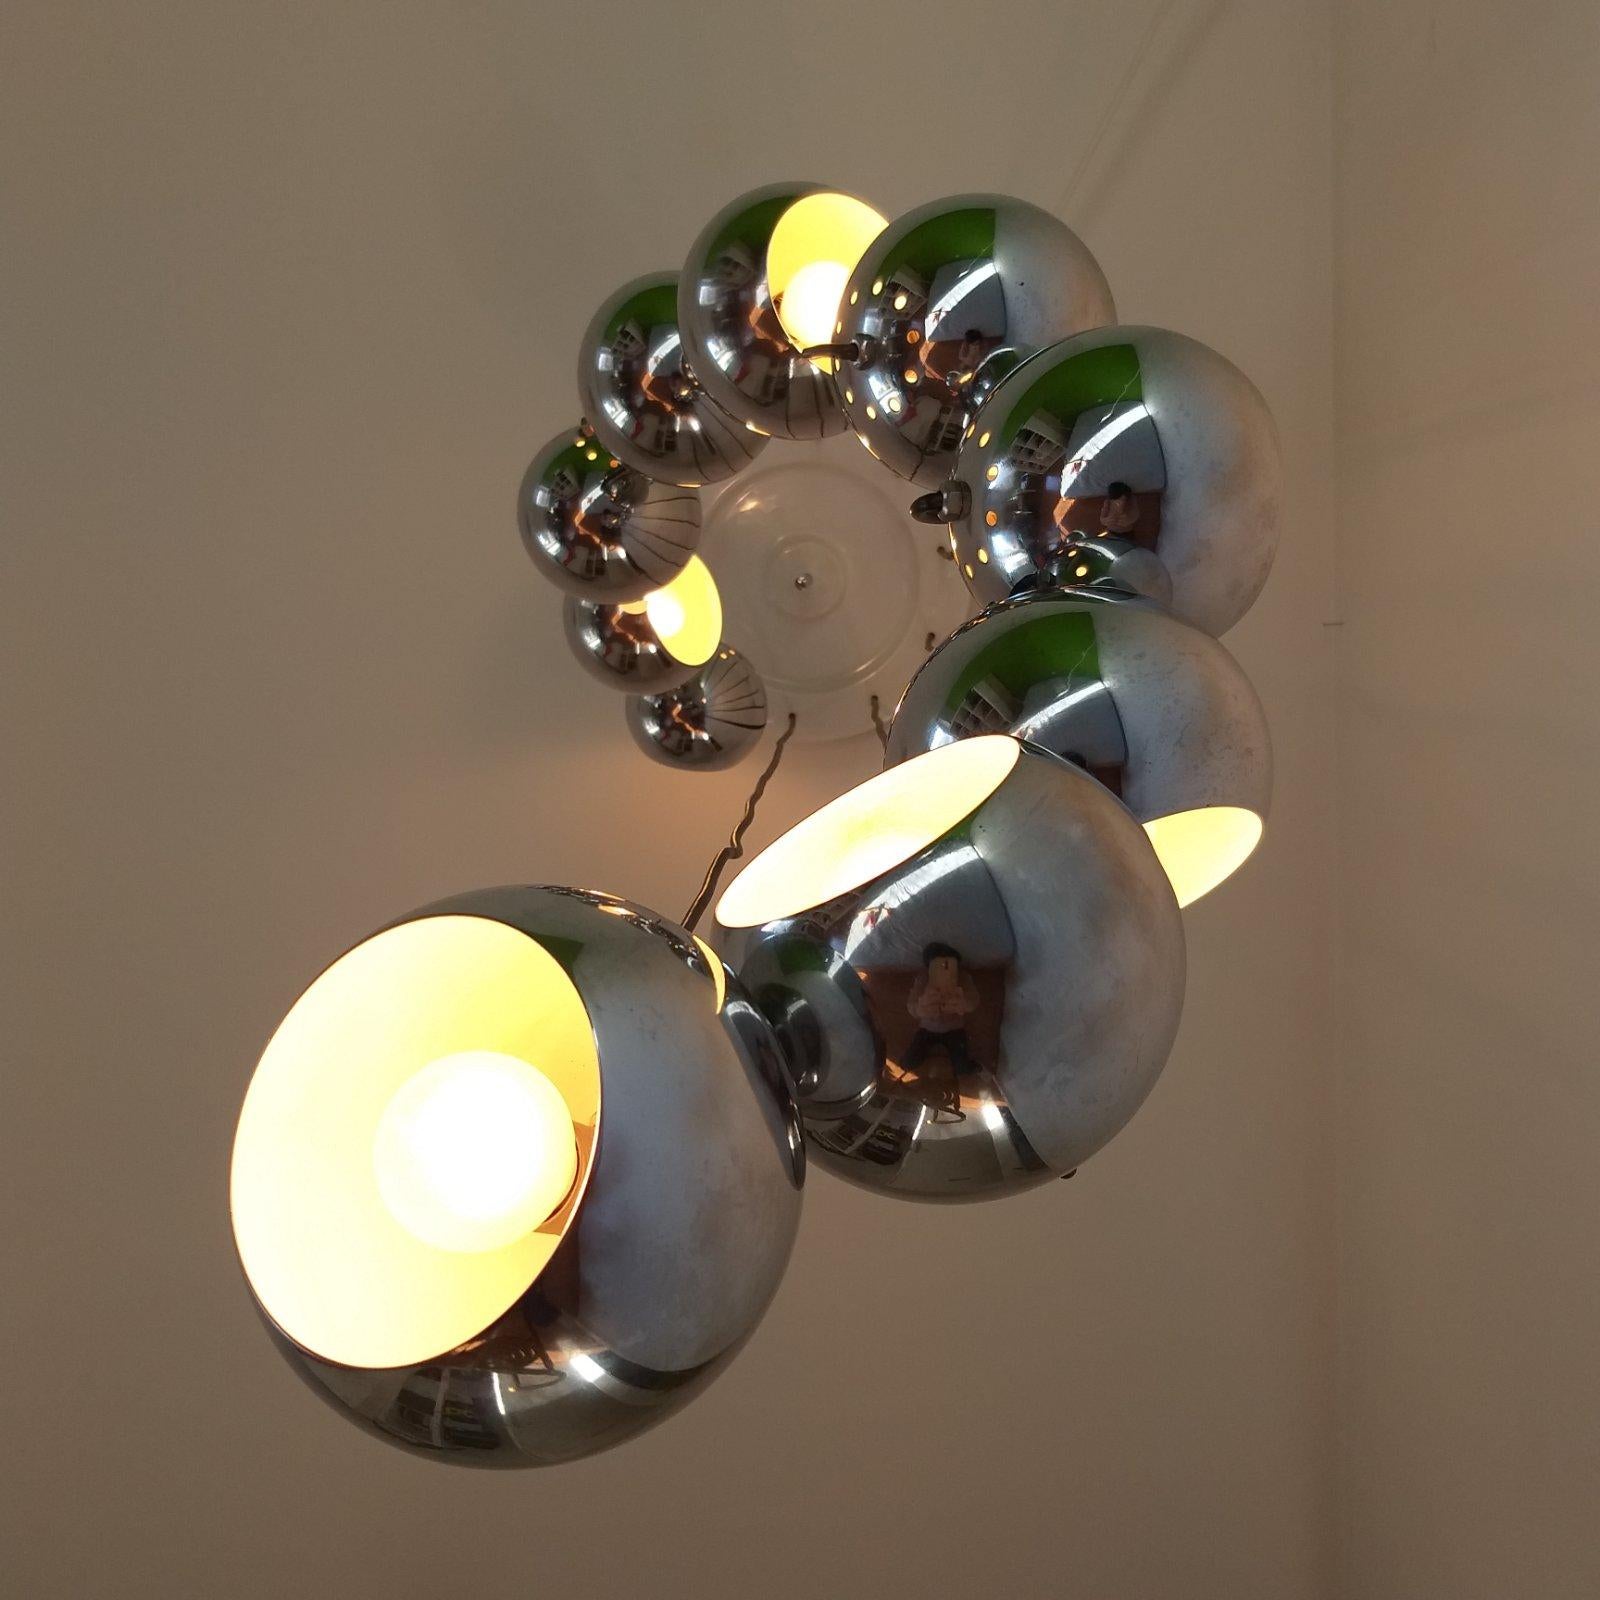 Rare mid century cascade ceiling lamp produce by IGuzzini in the 70s.